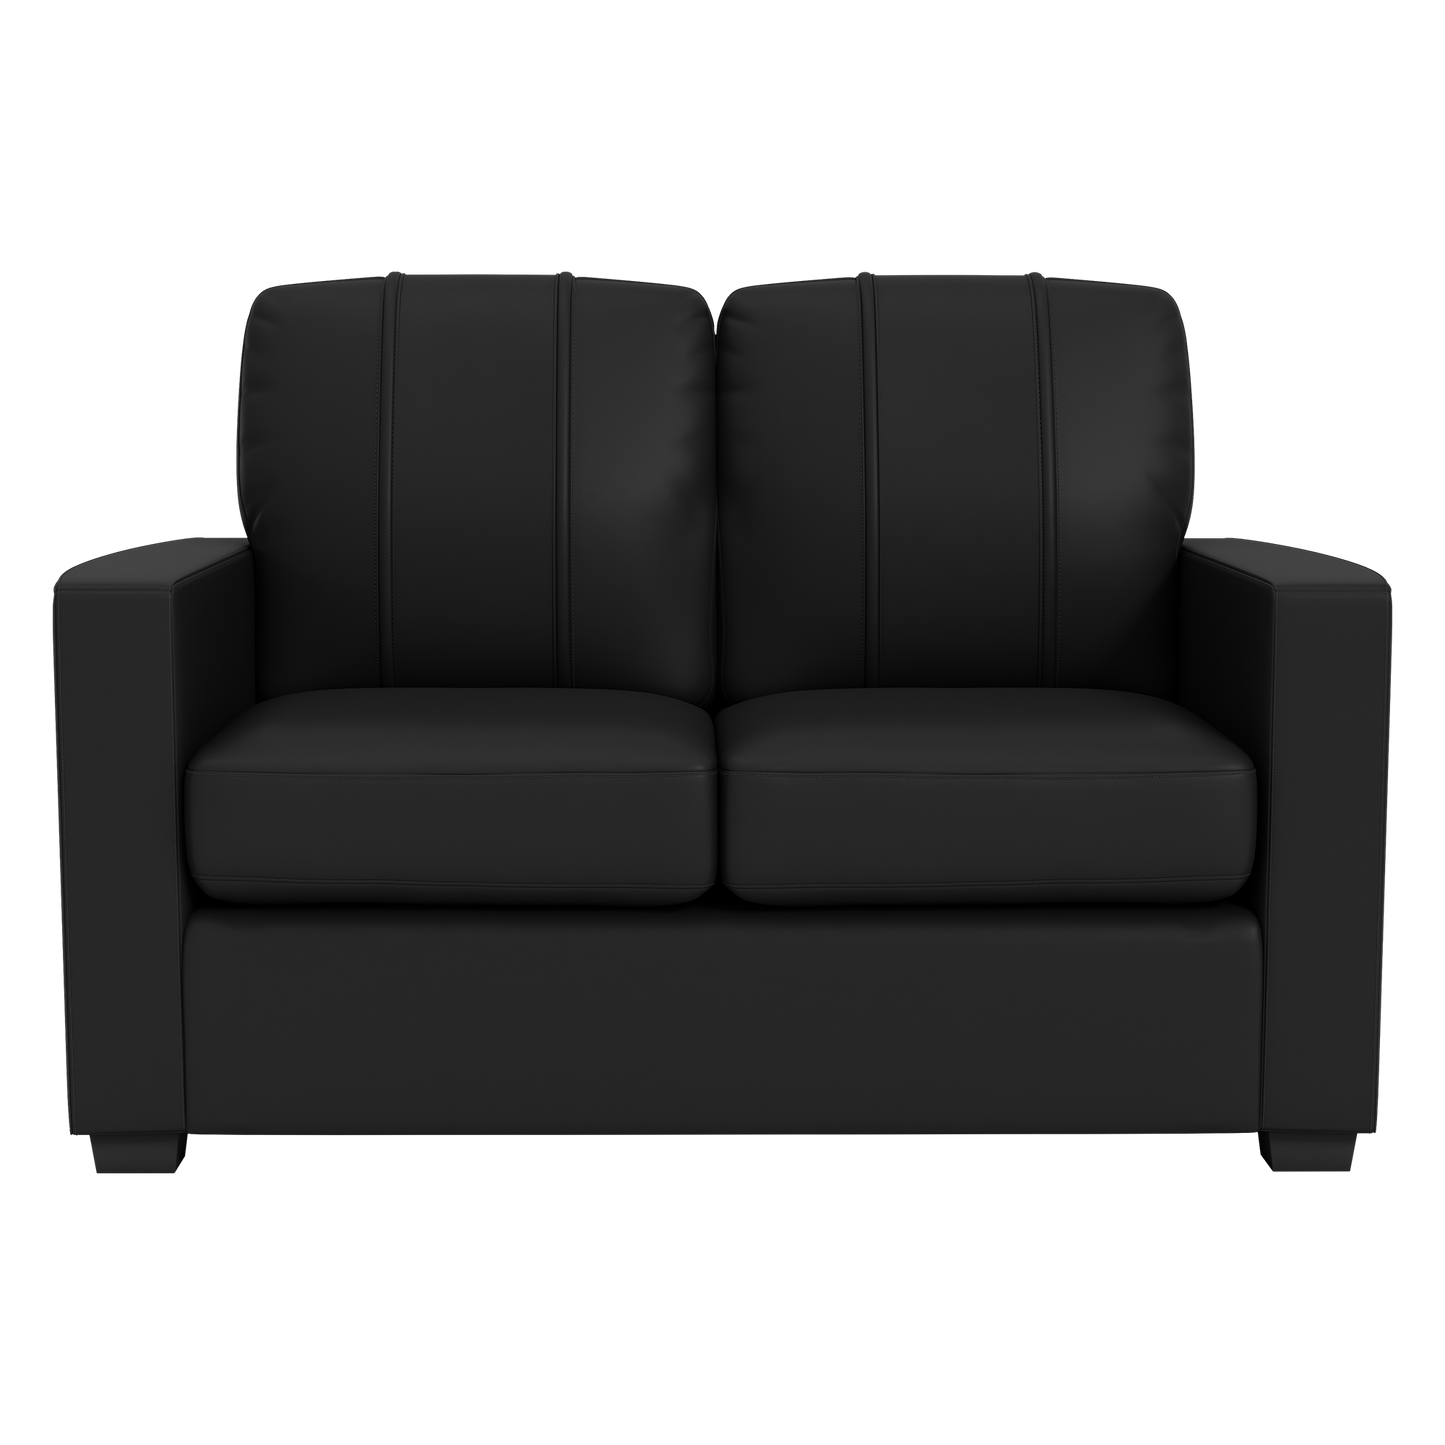 Silver Loveseat with Houston Astros 2017 Champions